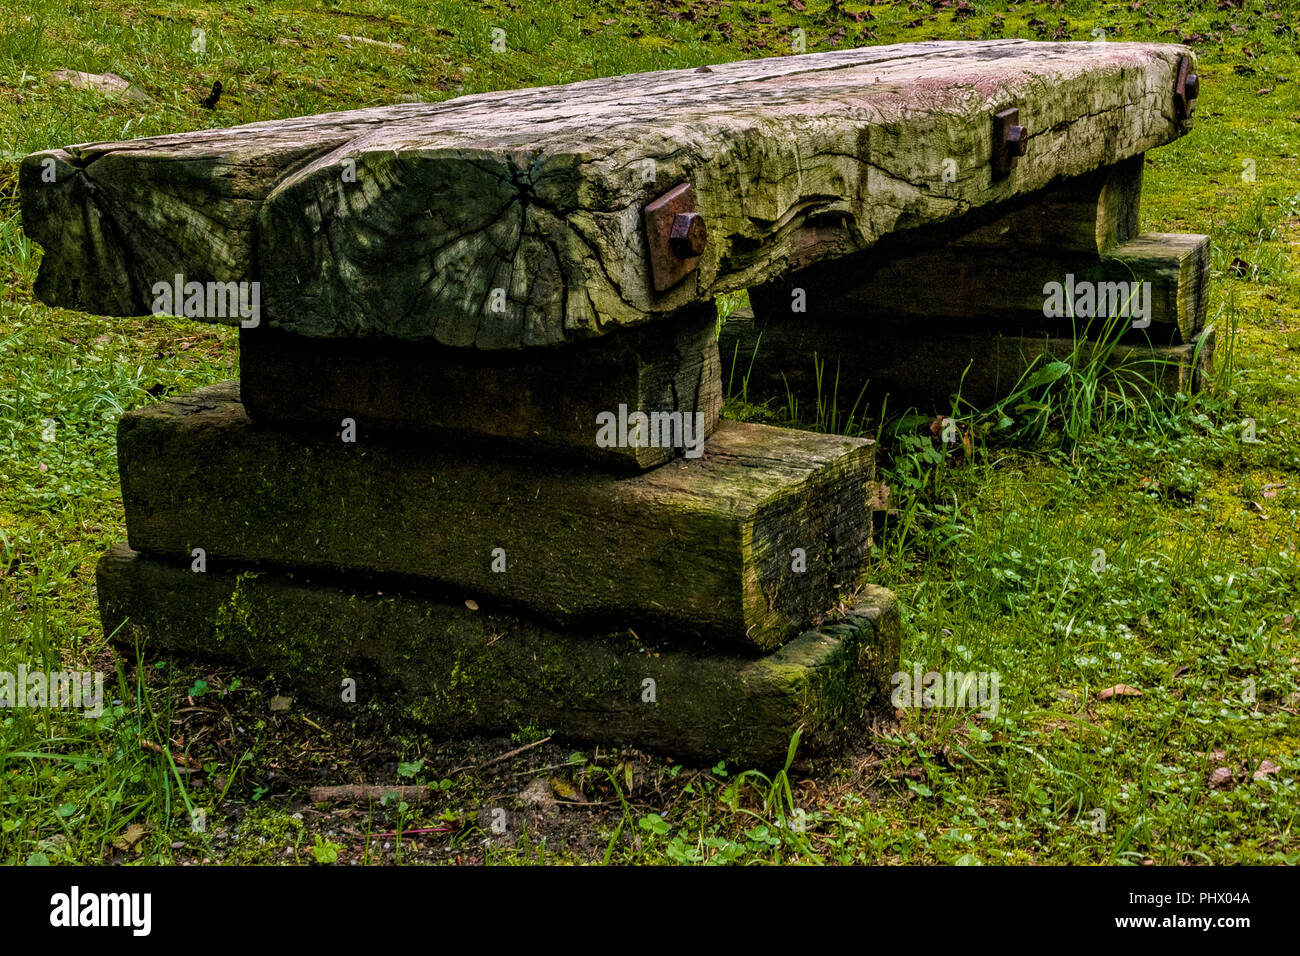 railway sleepers for street furniture in the foreground Stock Photo